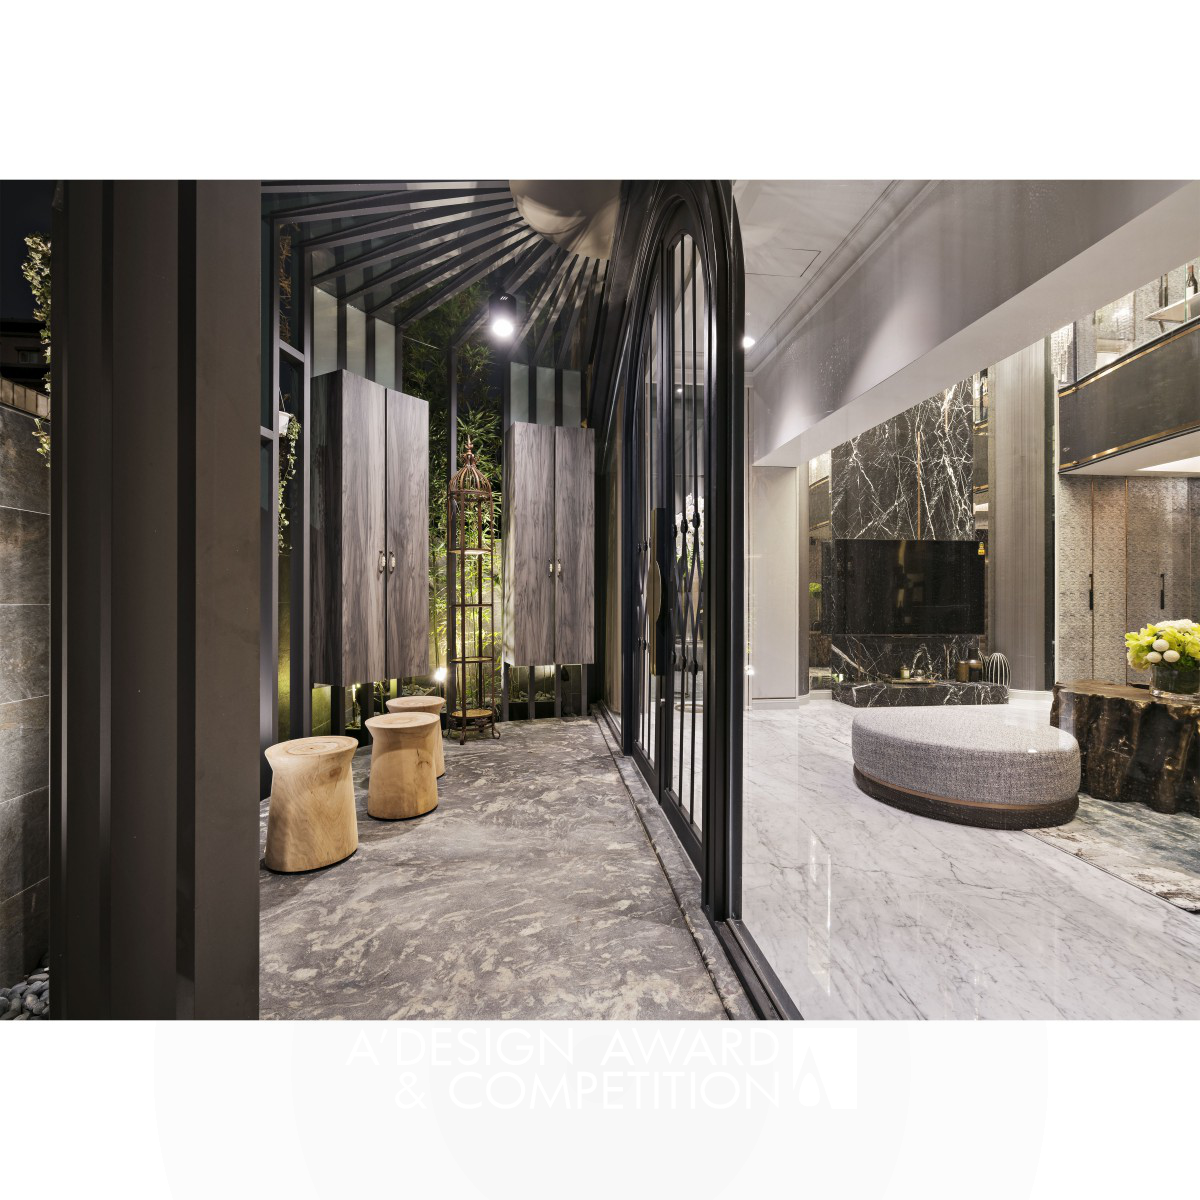 Castle of Fairy Tale Residential House by Fang Ming Lo Bronze Interior Space and Exhibition Design Award Winner 2019 